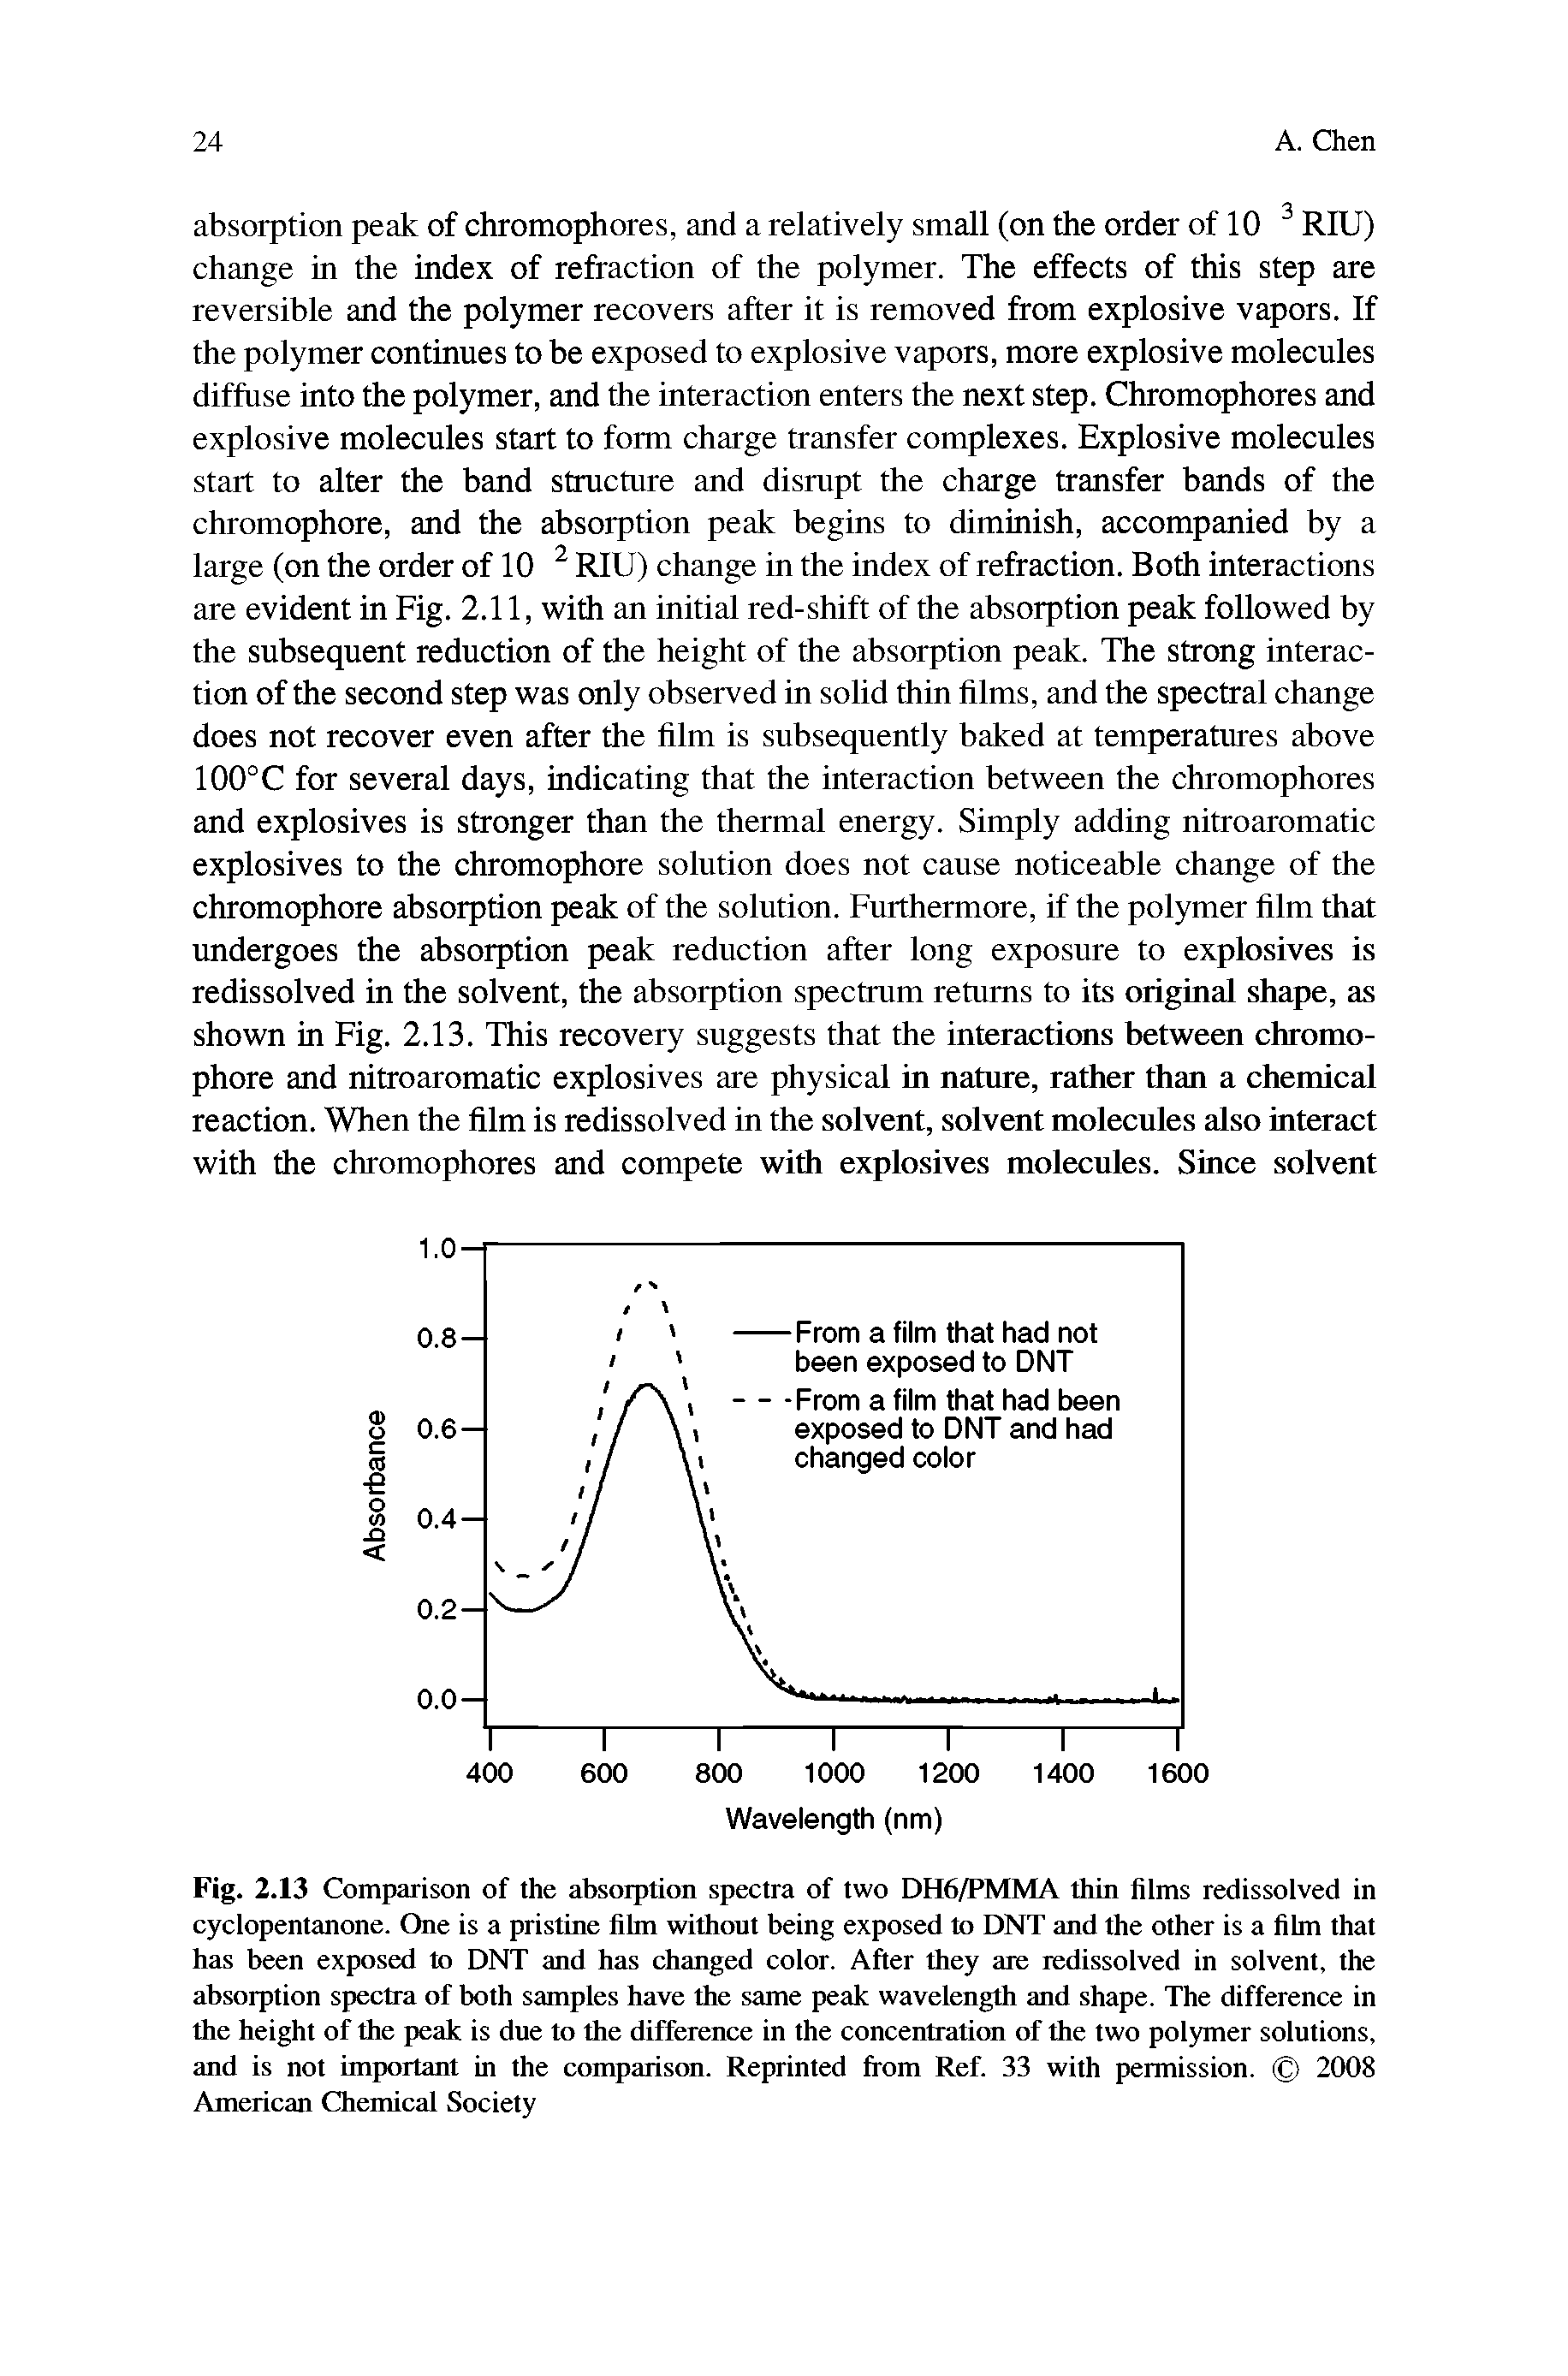 Fig. 2.13 Comparison of the absorption spectra of two DH6/PMMA thin films redissolved in cyclopentanone. One is a pristine film without being exposed to DNT and the other is a film that has been exposed to DNT and has changed color. After they are redissolved in solvent, the absorption spectra of both samples have the same peak wavelength and shape. The difference in the height of the peak is due to the difference in the concentration of the two polymer solutions, and is not important in the comparison. Reprinted from Ref. 33 with permission. 2008 American Chemical Society...